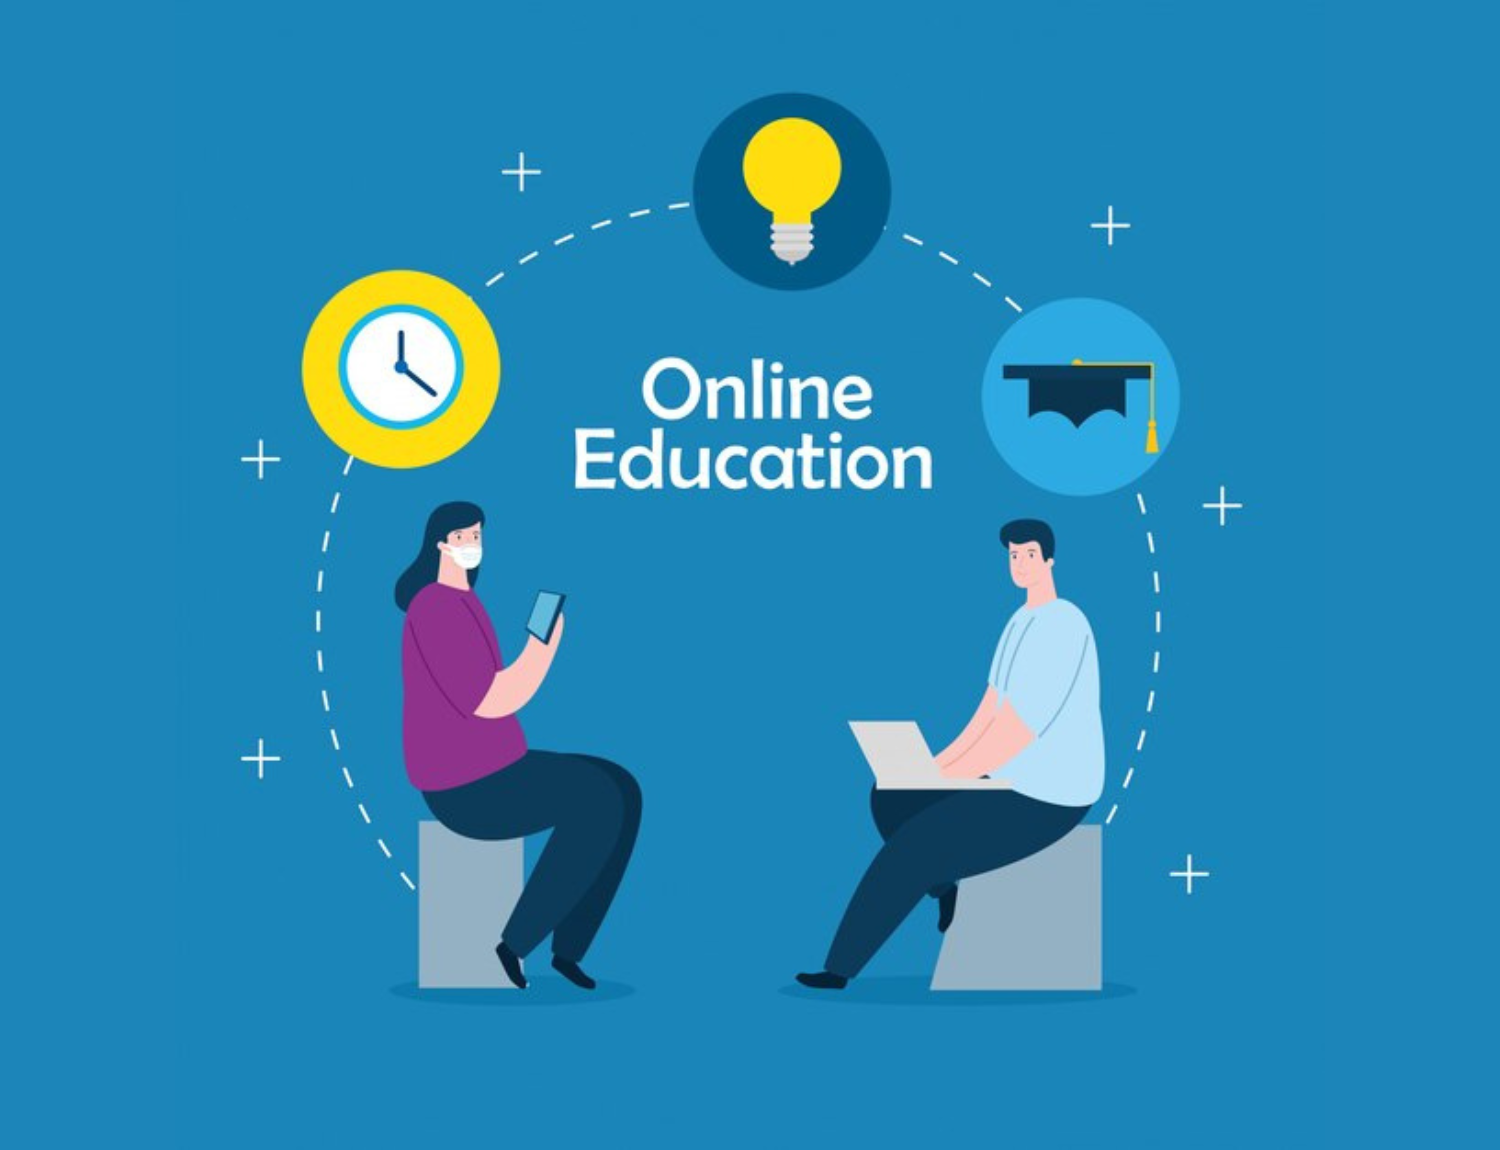 challenges of online education